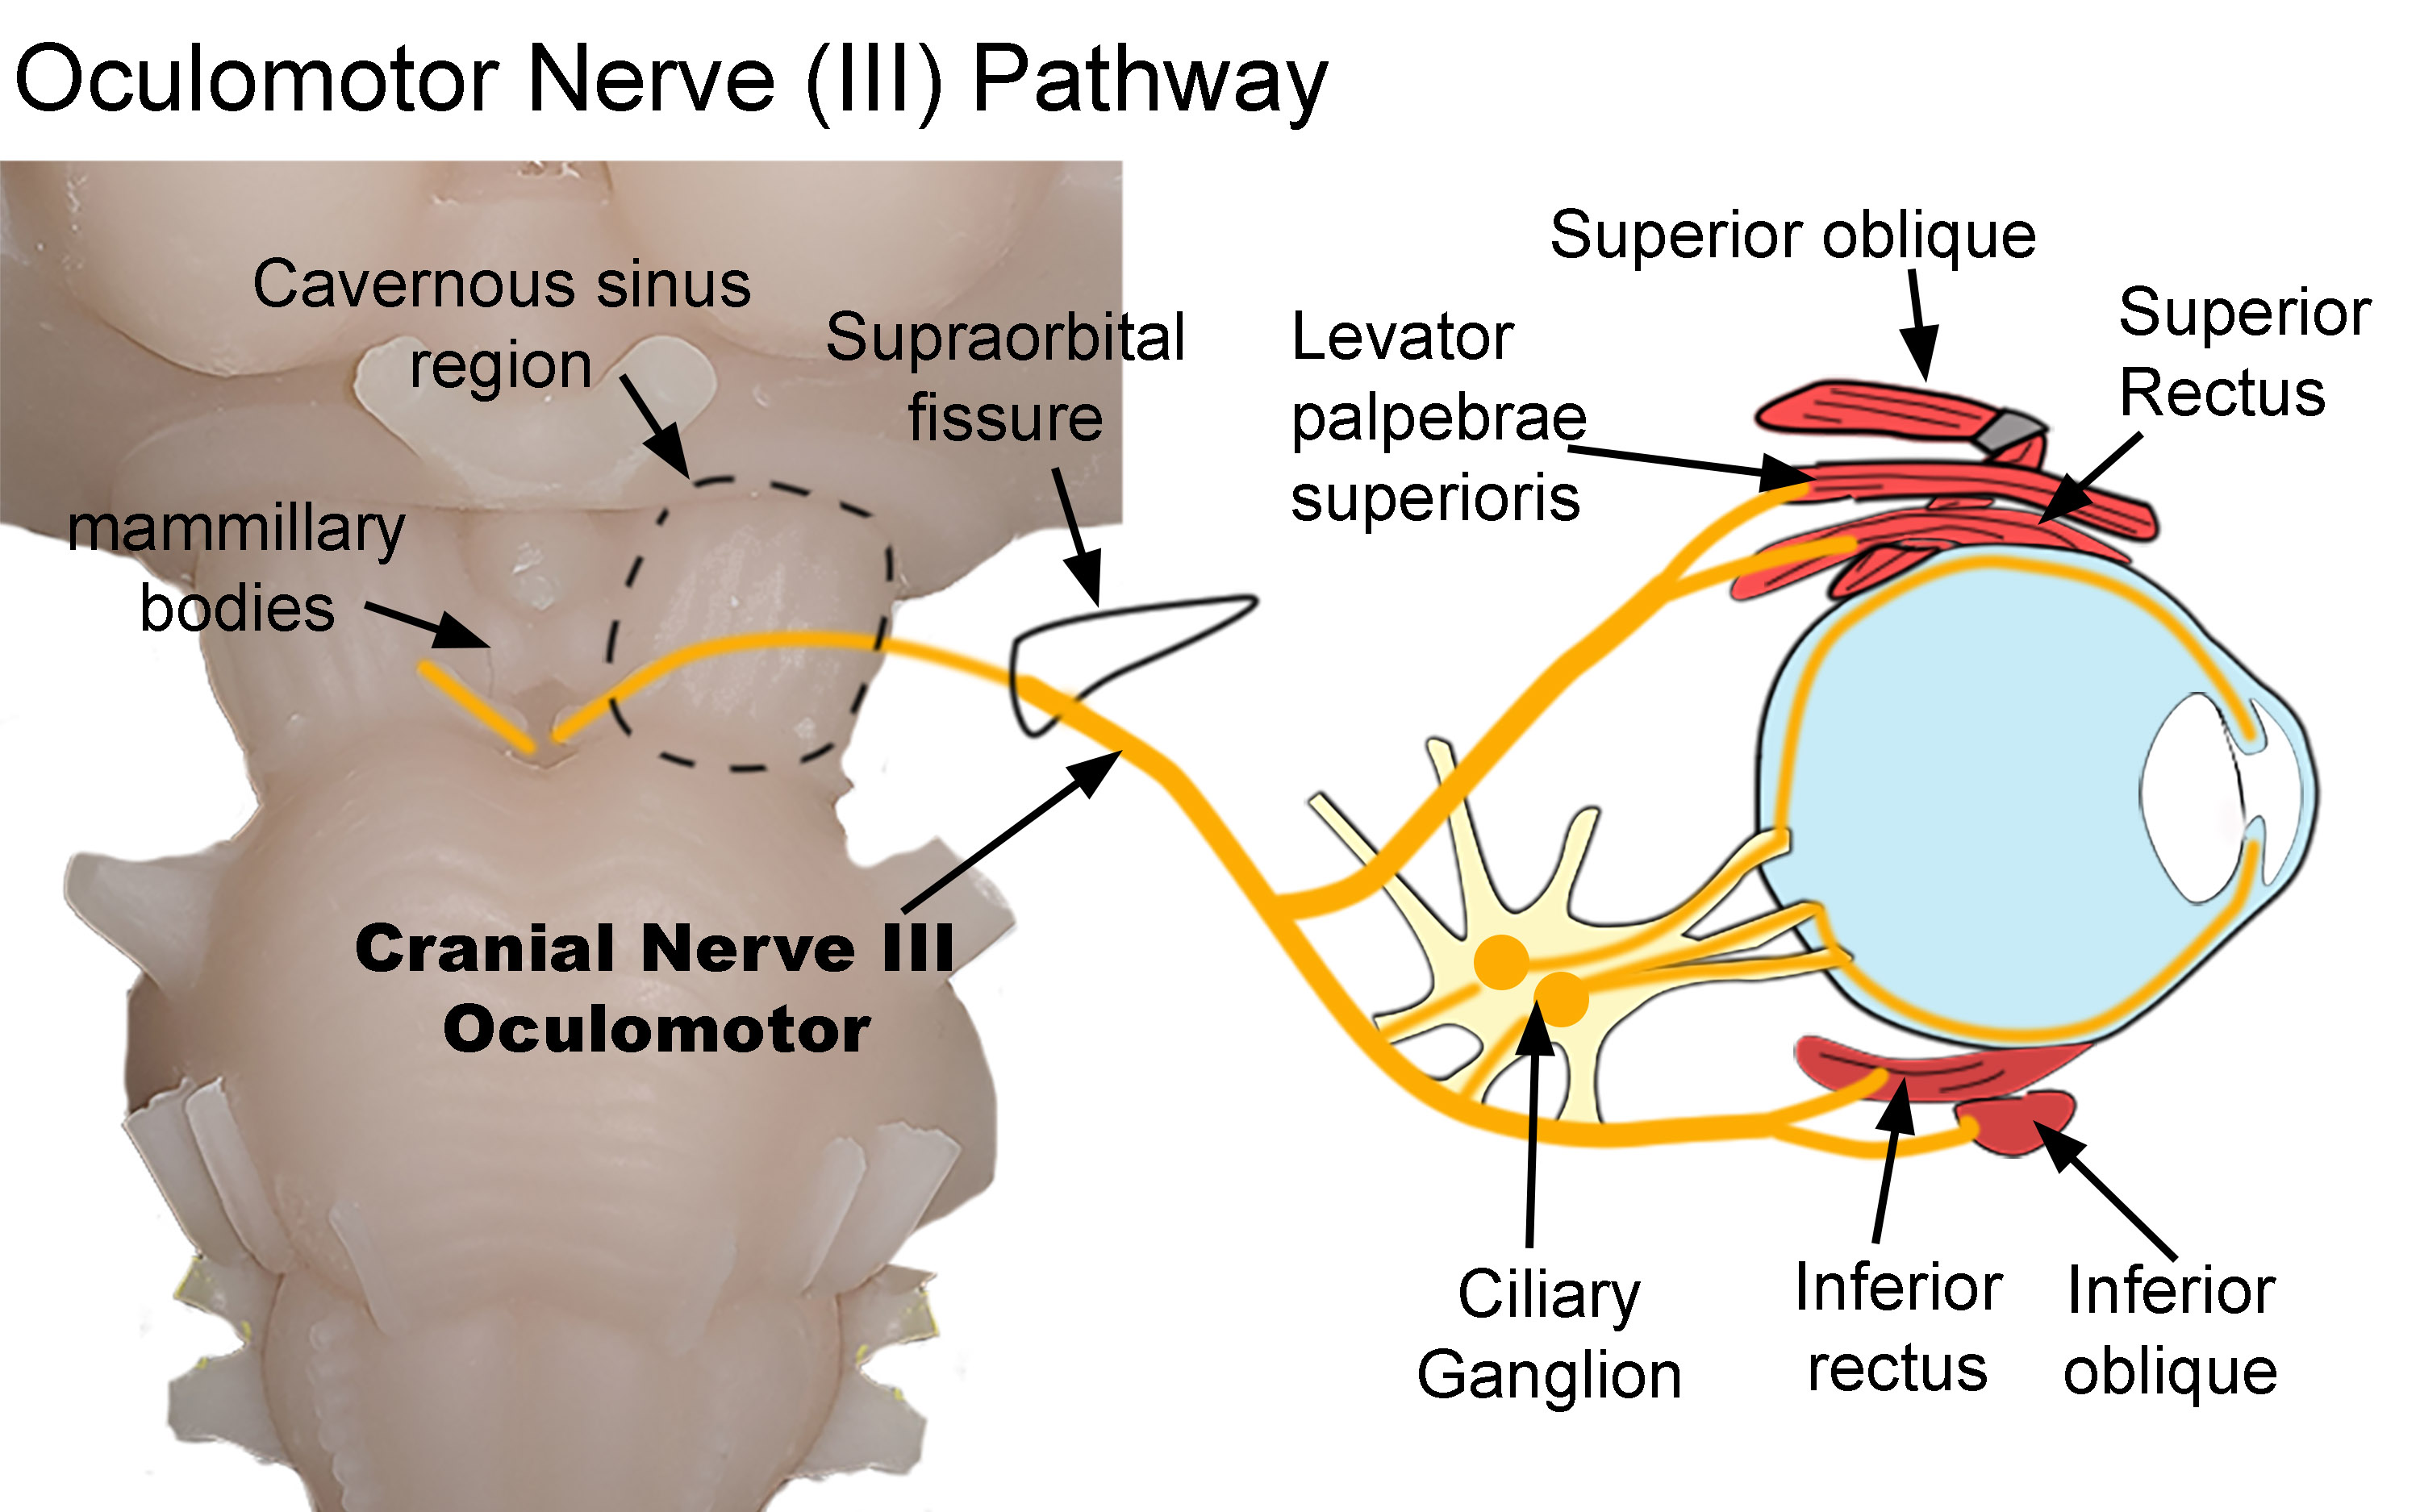 Pathway of the Oculomotor Nerve (III). Diagram shows the pathway of the oculomotor nerve as it exits the brainstem and terminates within the orbit. After exiting the brainstem, it traverses both the cavernous sinus (dotted line) and supraorbital fissure (black line) before entering the orbit. Parasympathetic nerves synapse within the ciliary ganglion. Postganglionic nerves then innervate the sphincter papillae and ciliary muscles. Somatic nerves innervate the superior oblique, levator palpebrae superioris, superior rectus, inferior rectus, and inferior oblique muscles. 